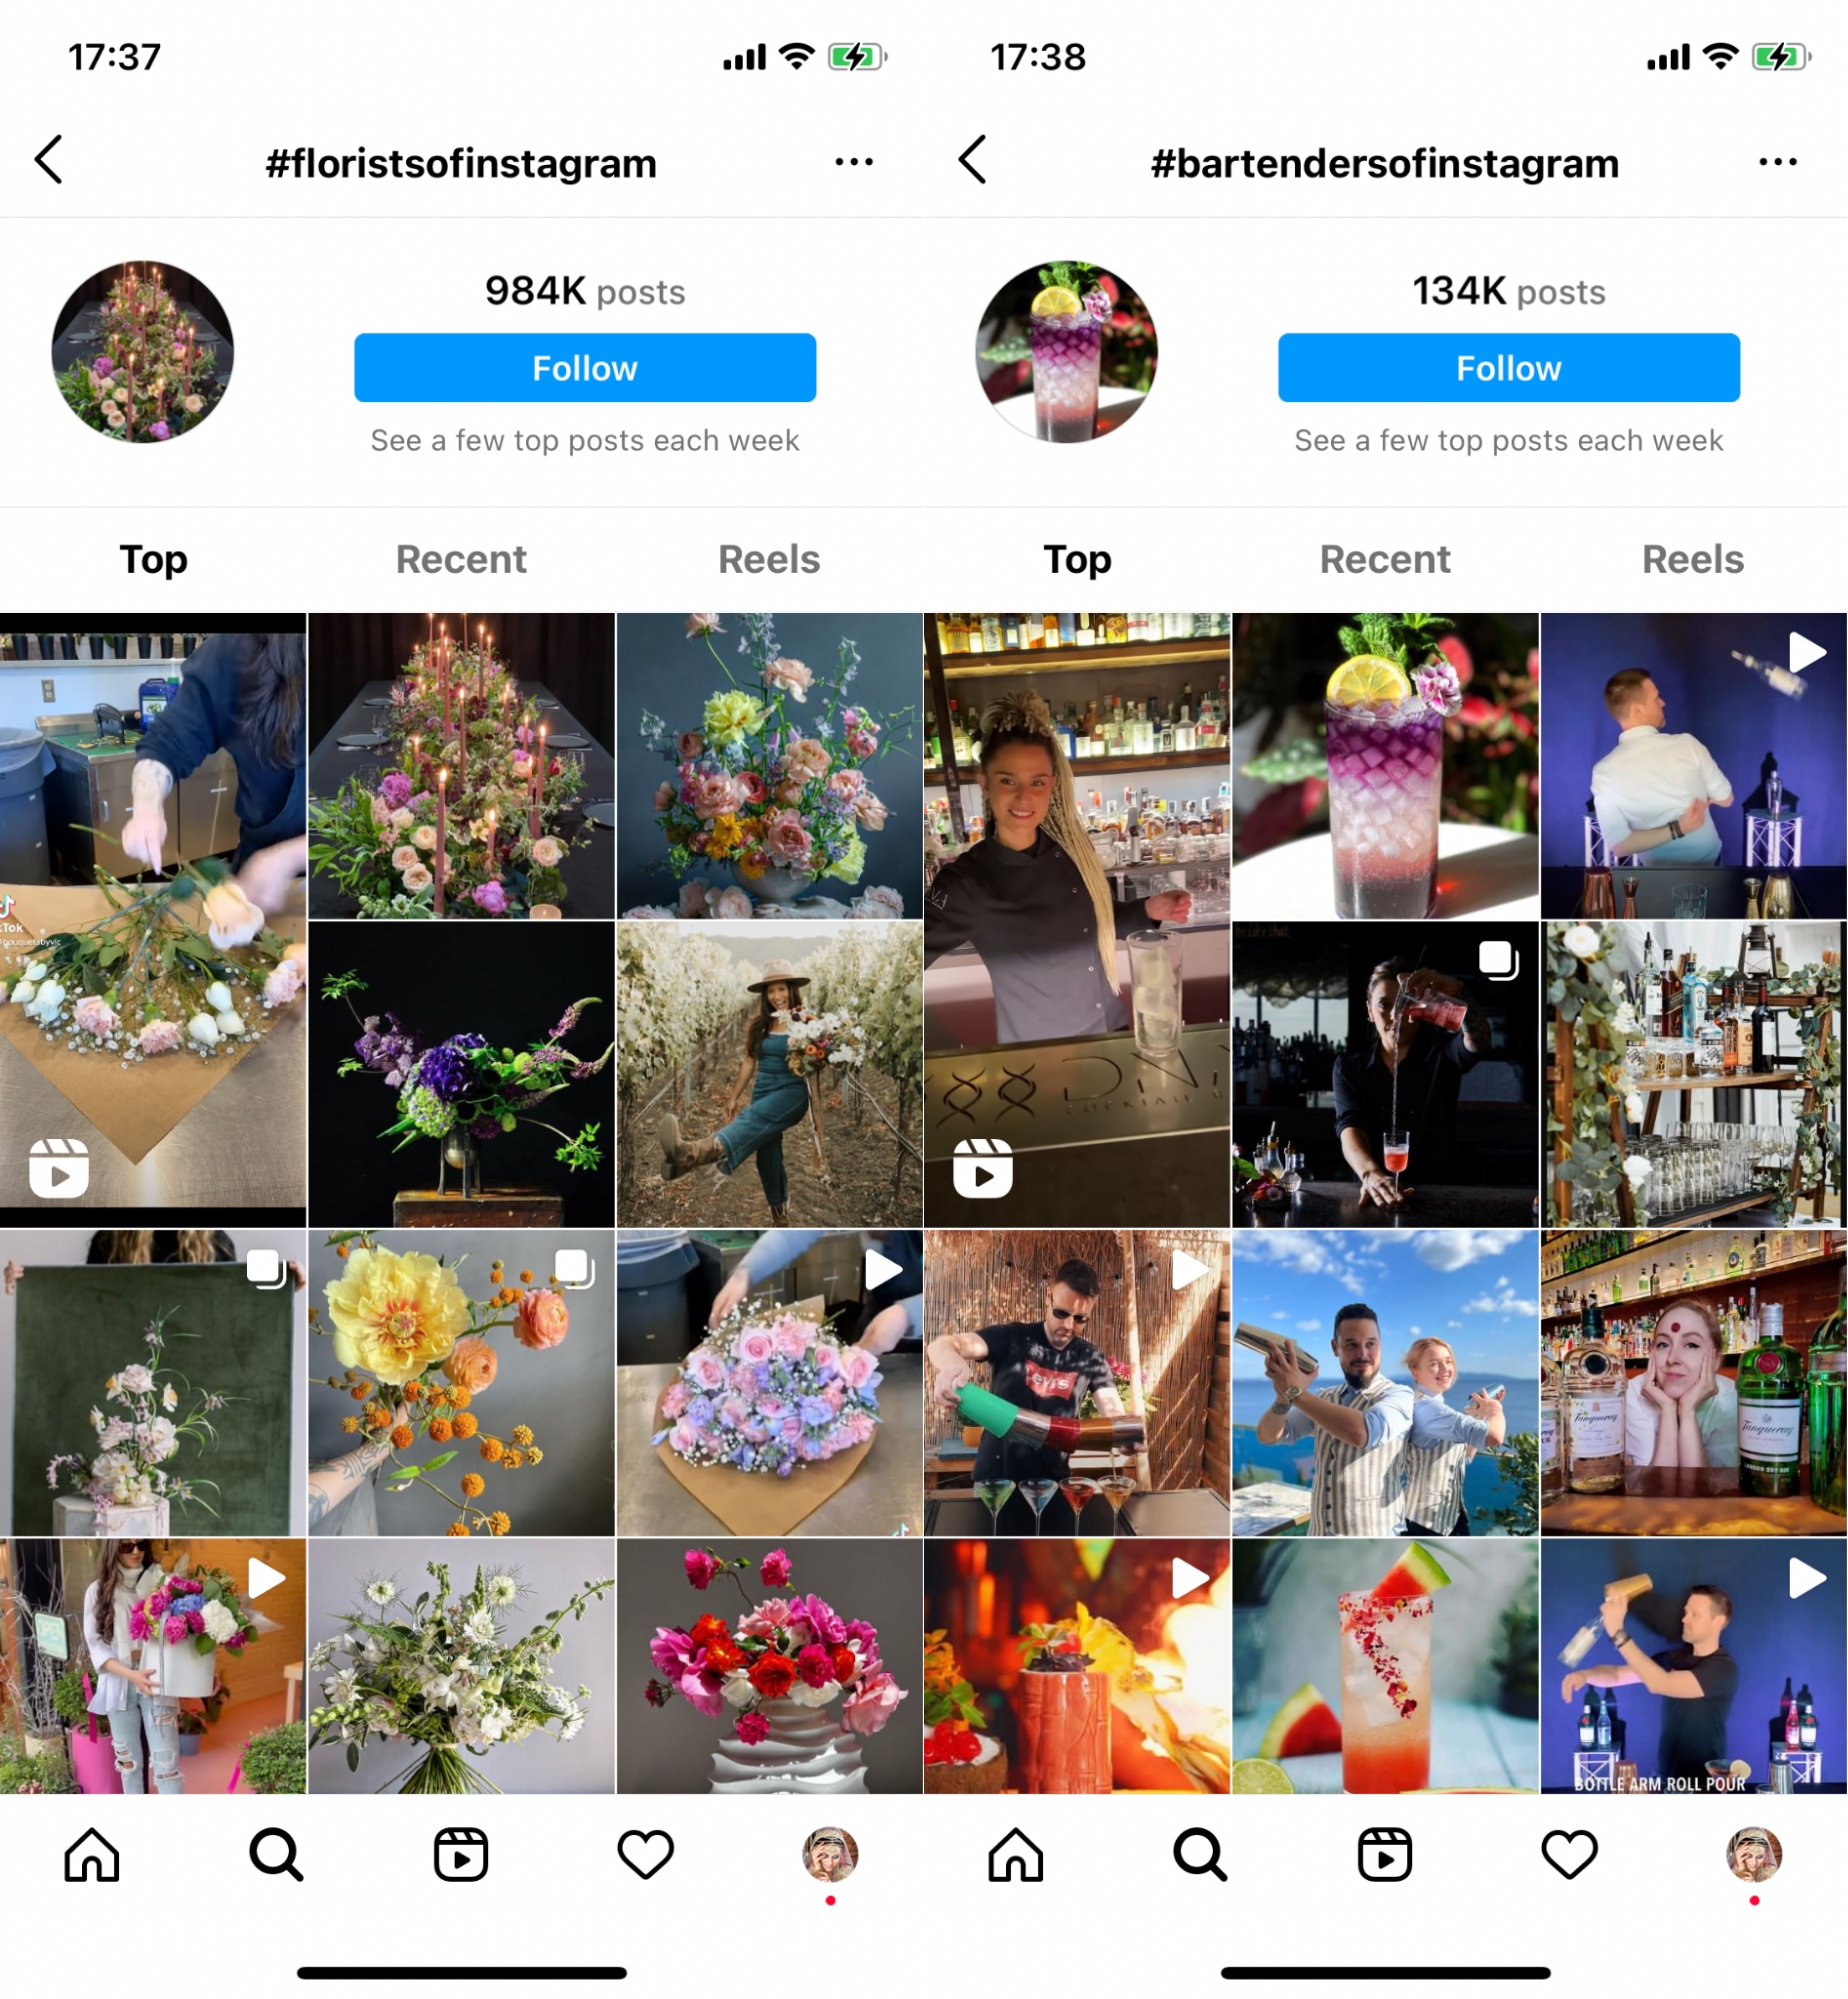 Screenshot of searching by hashtags #bartendersofinstagram and #floristsofinstagram